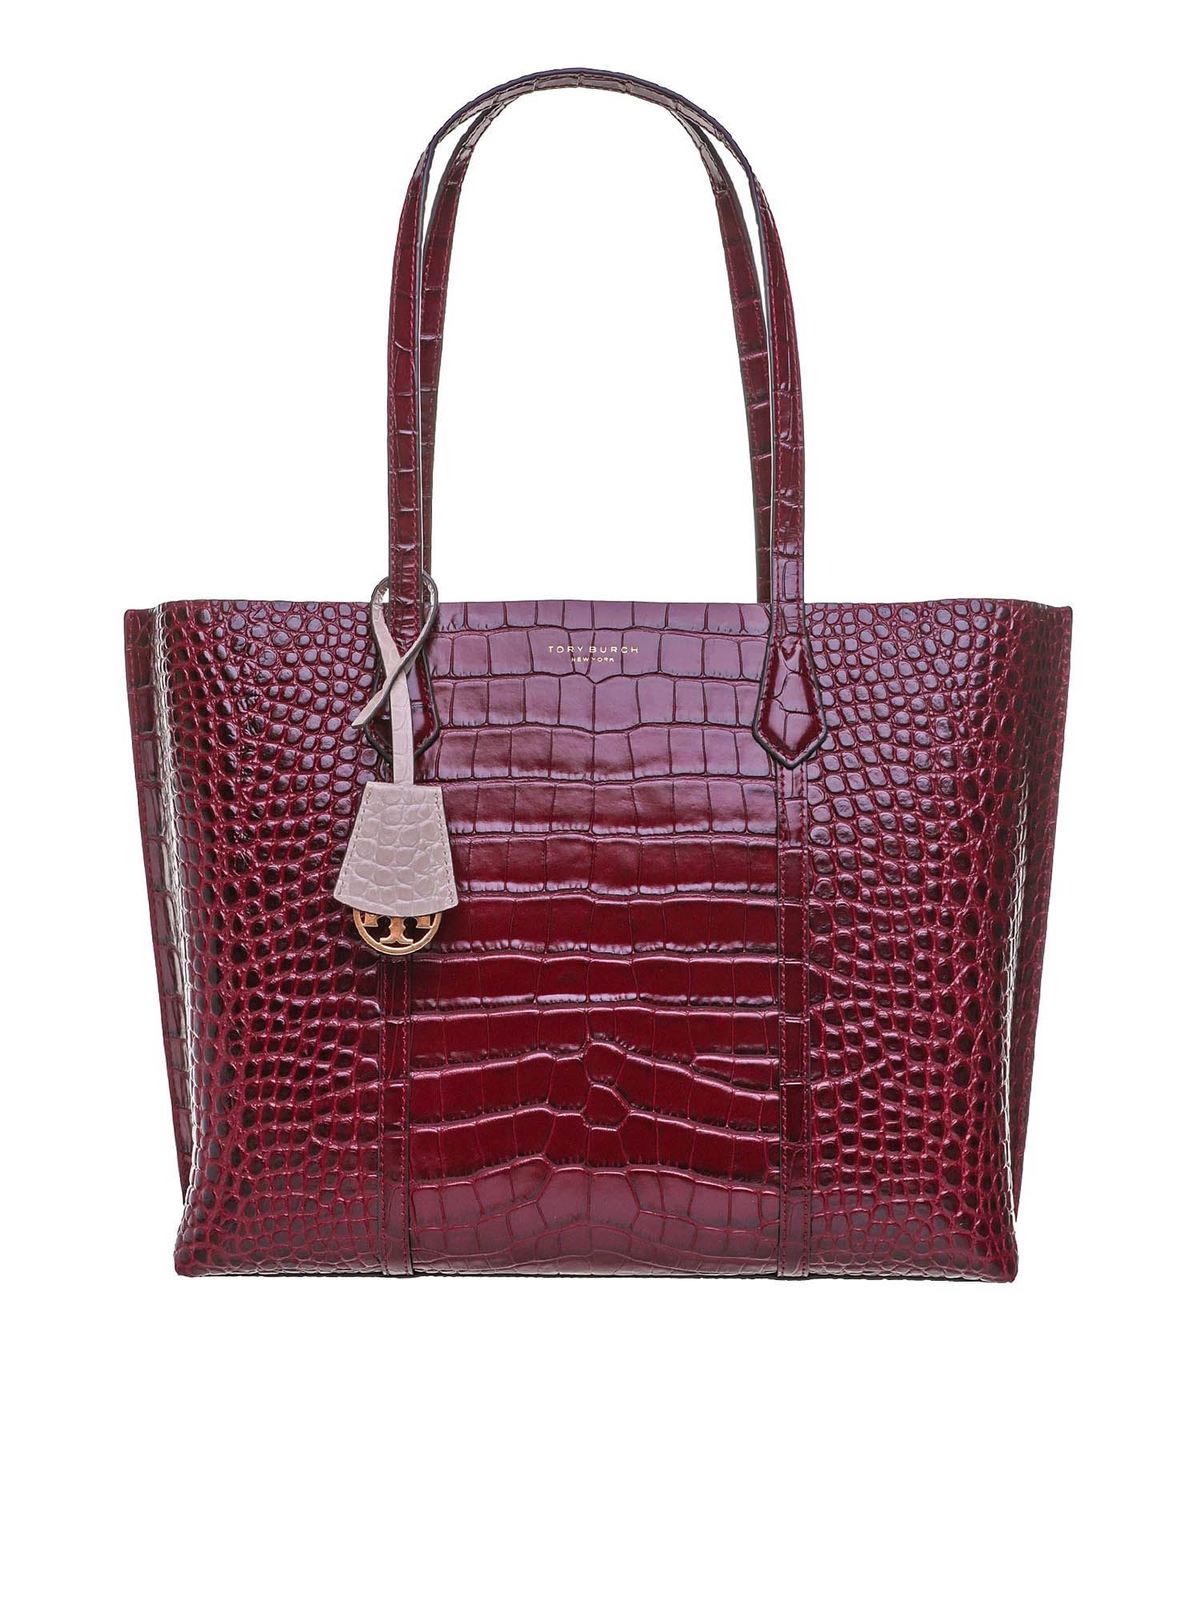 Totes bags Tory Burch - Leather Perry shopper bag in Claret color - 73619639